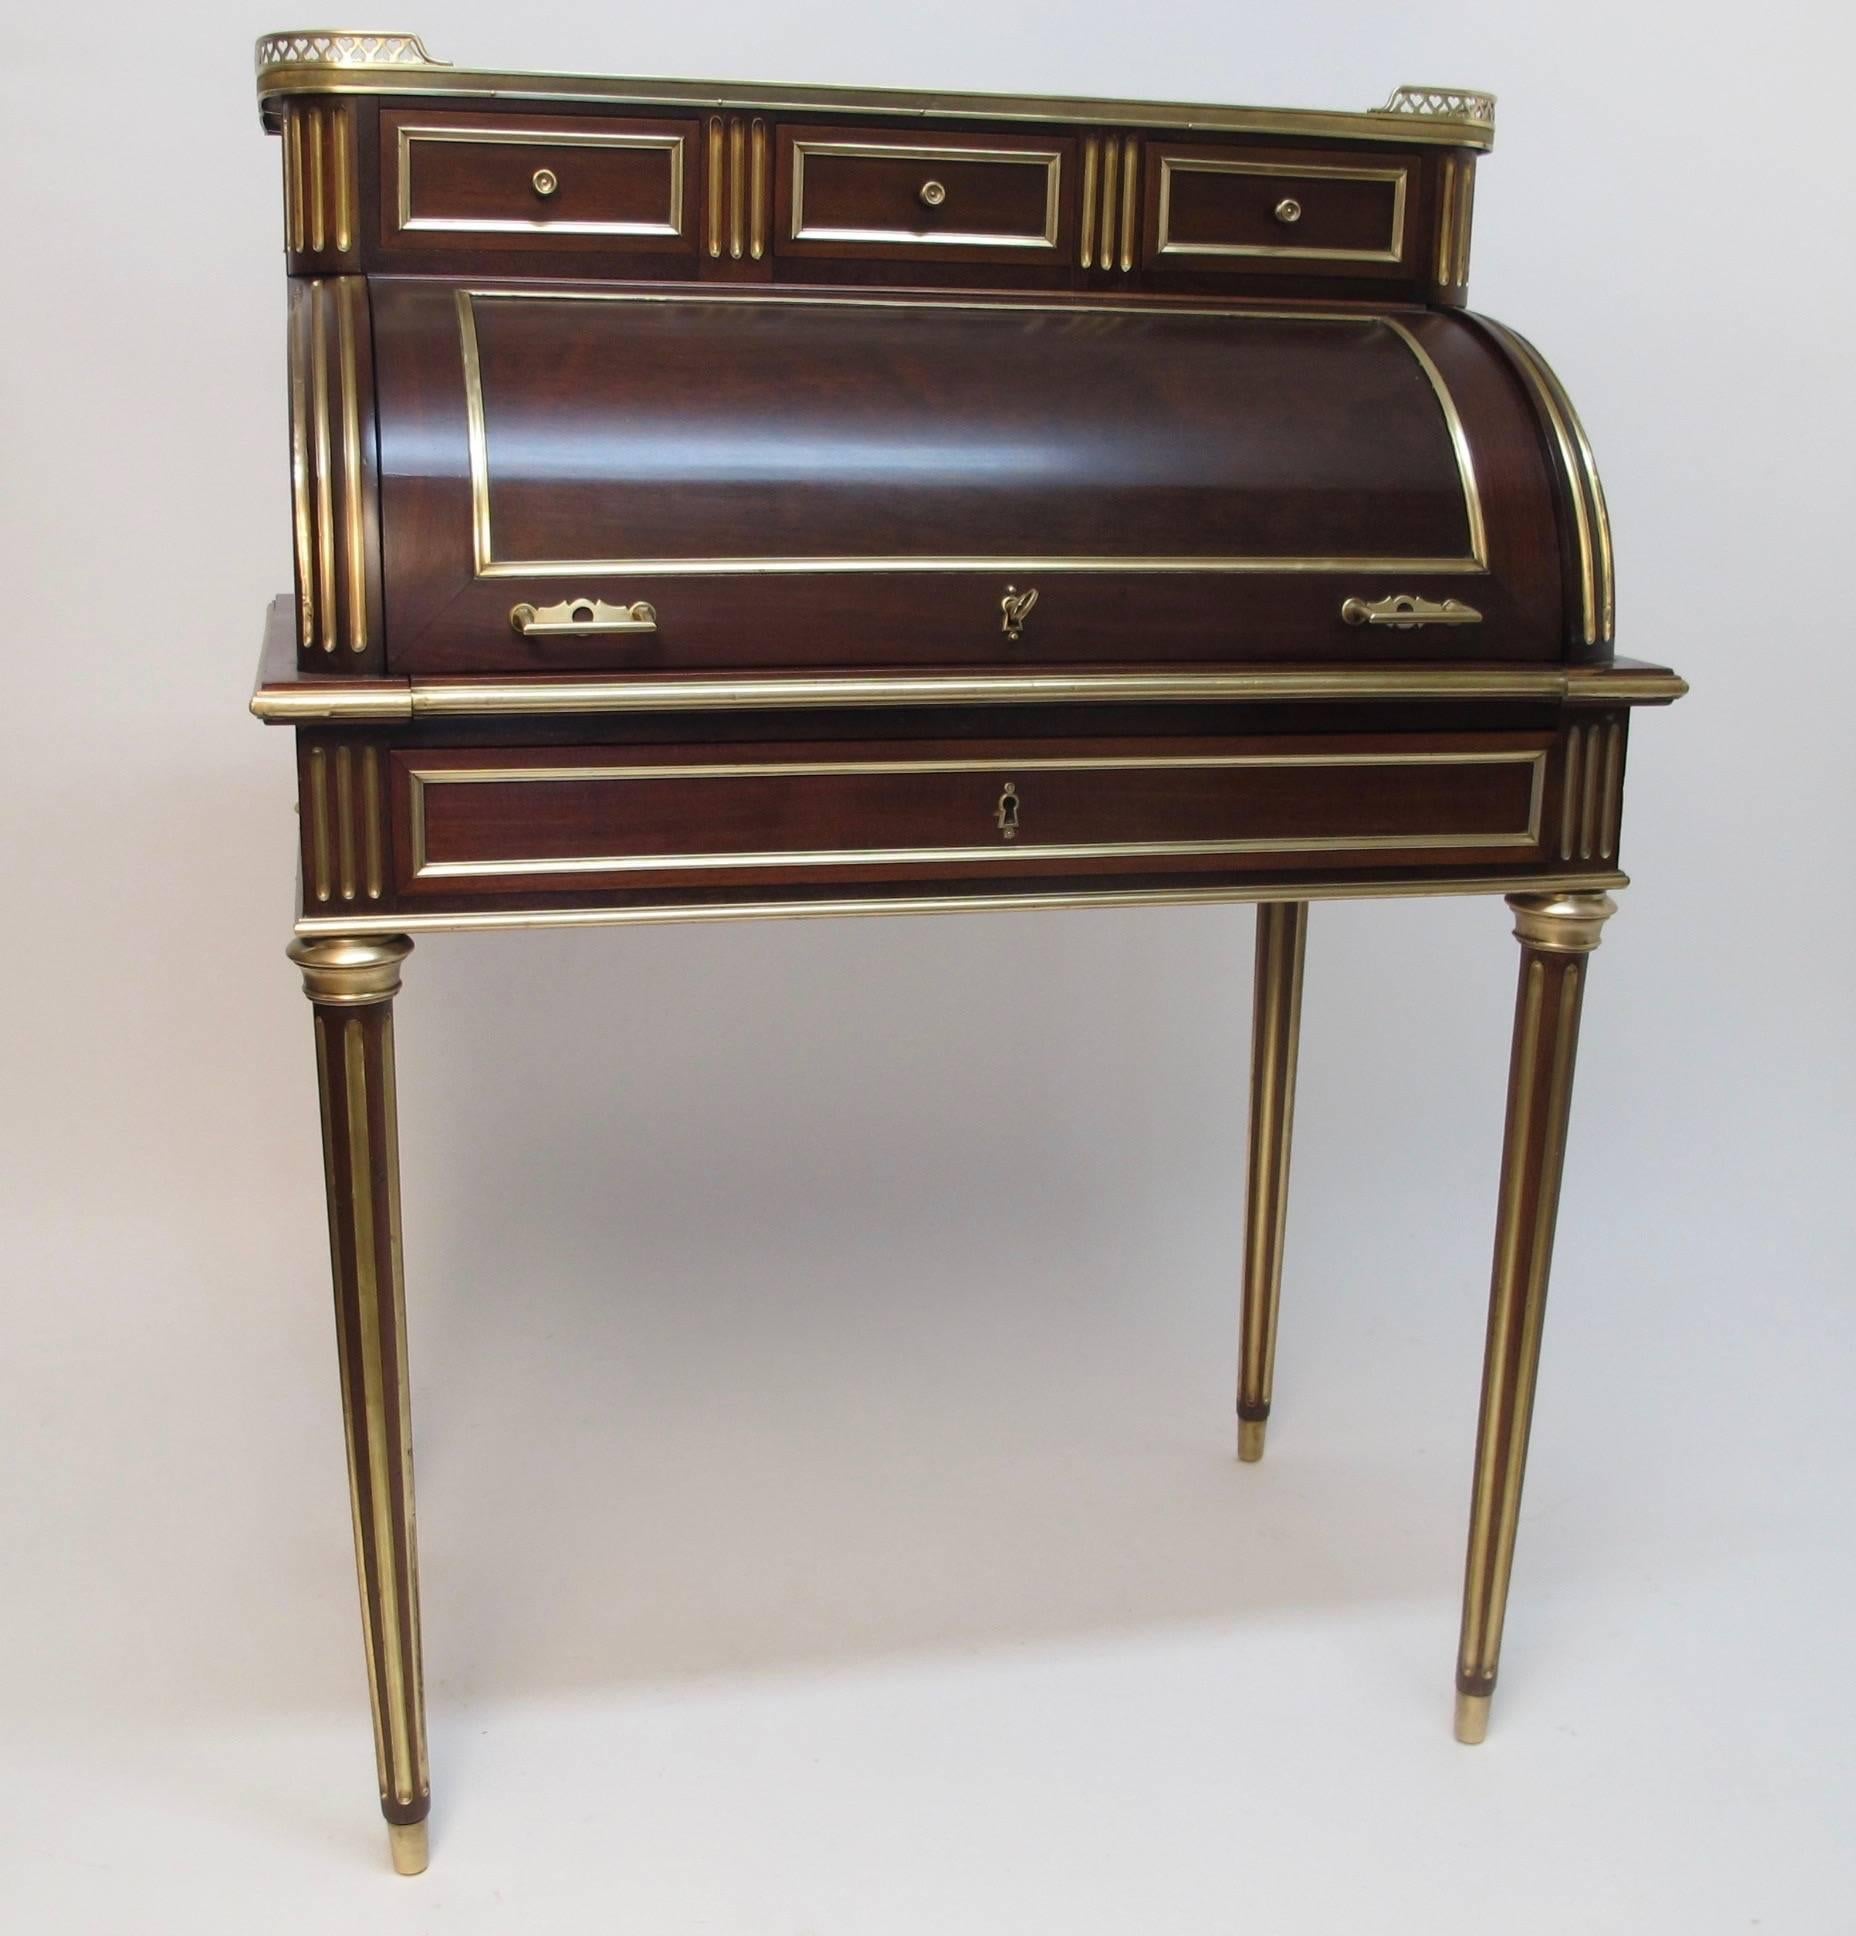 Mahogany cylinder shape desk with brass gallery around inset leather top above three short drawers. Roll front opens to reveal leather pull-out writing surface. All moldings of brass and inlaid brass on the fluted legs, France, circa 1870.